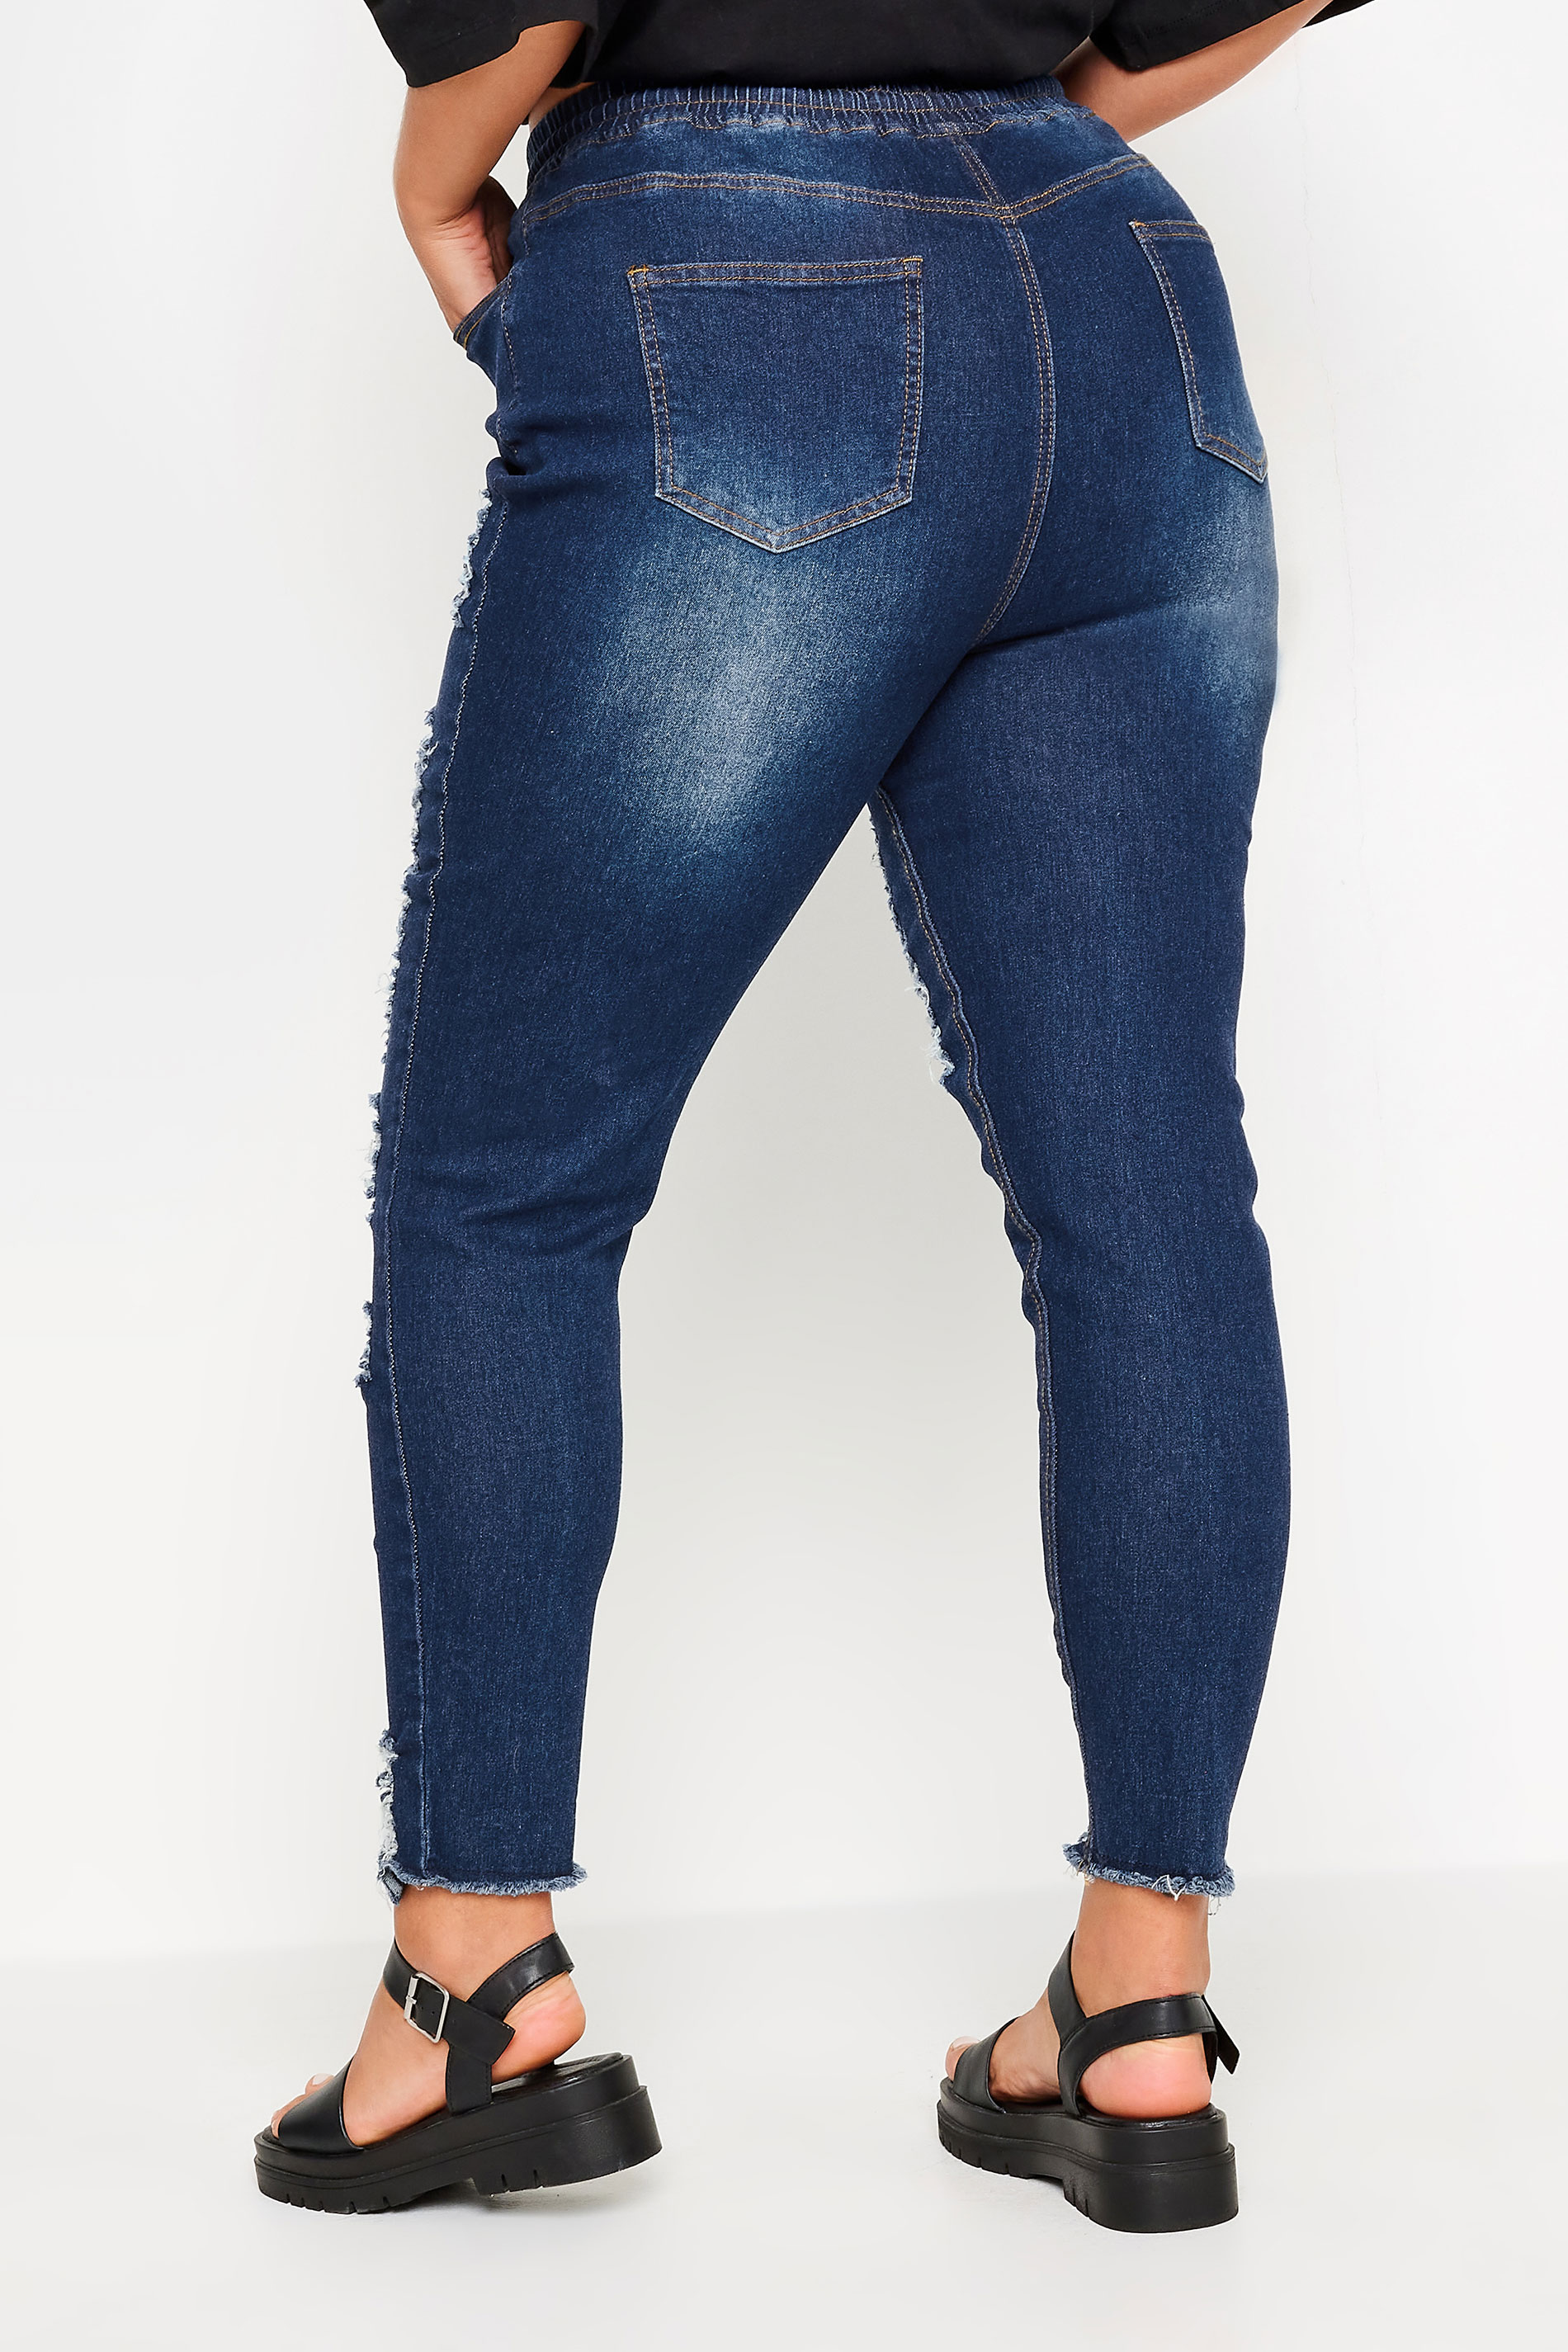 Plus Size Blue Elasticated Waist Ripped Skinny AVA Jeans | Yours Clothing  3